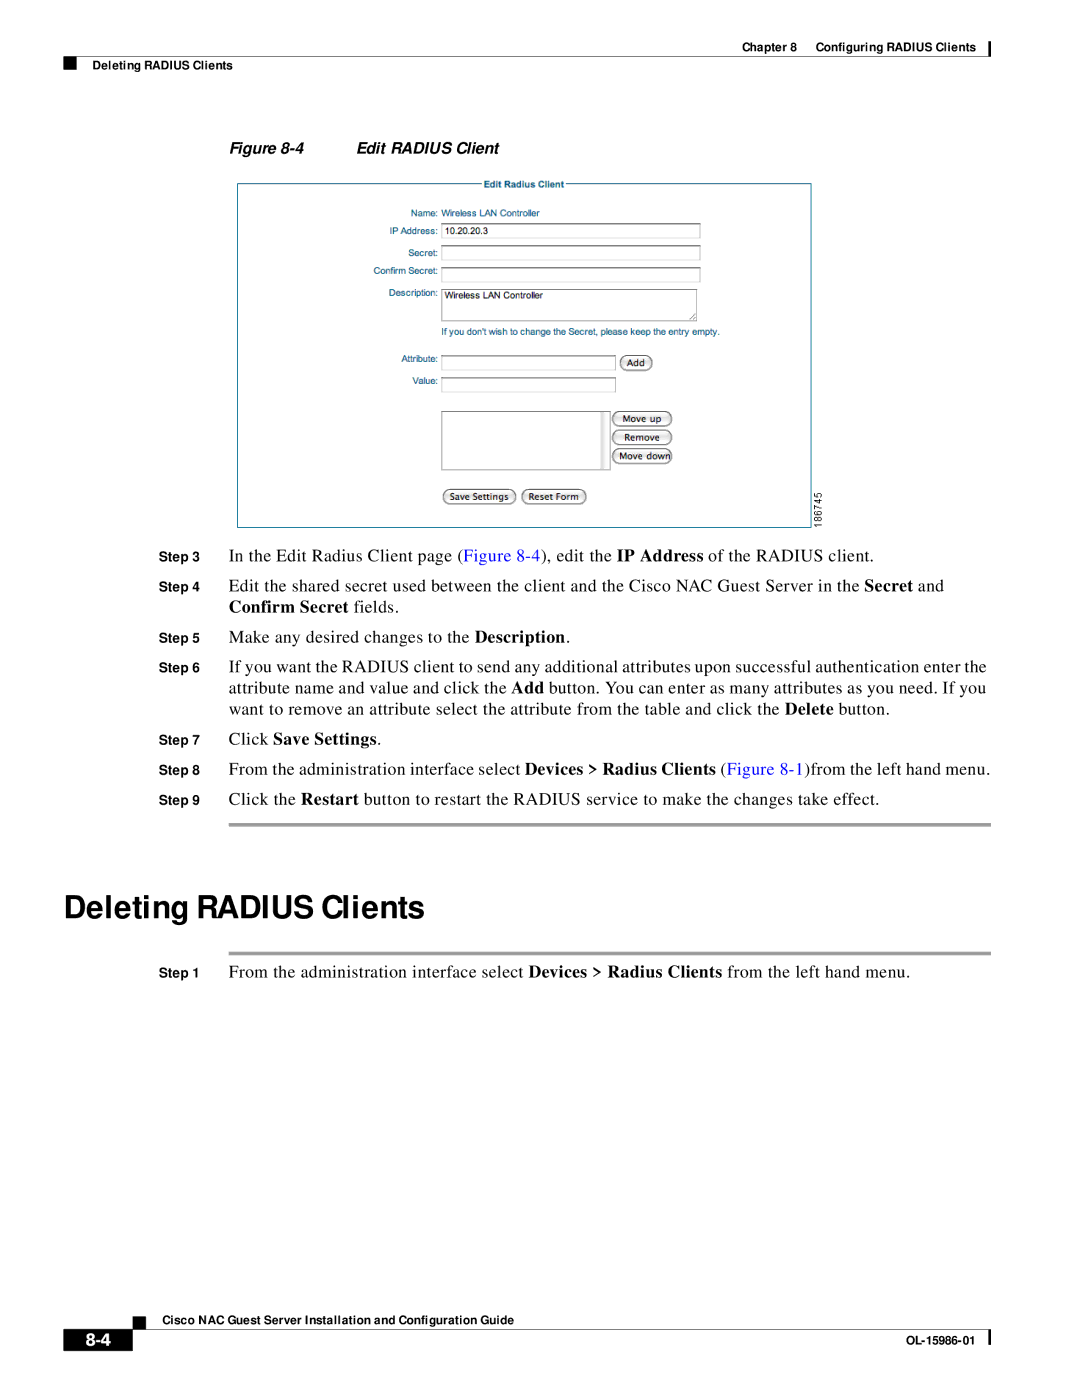 Cisco Systems OL-15986-01 manual Deleting Radius Clients, Click Save Settings 